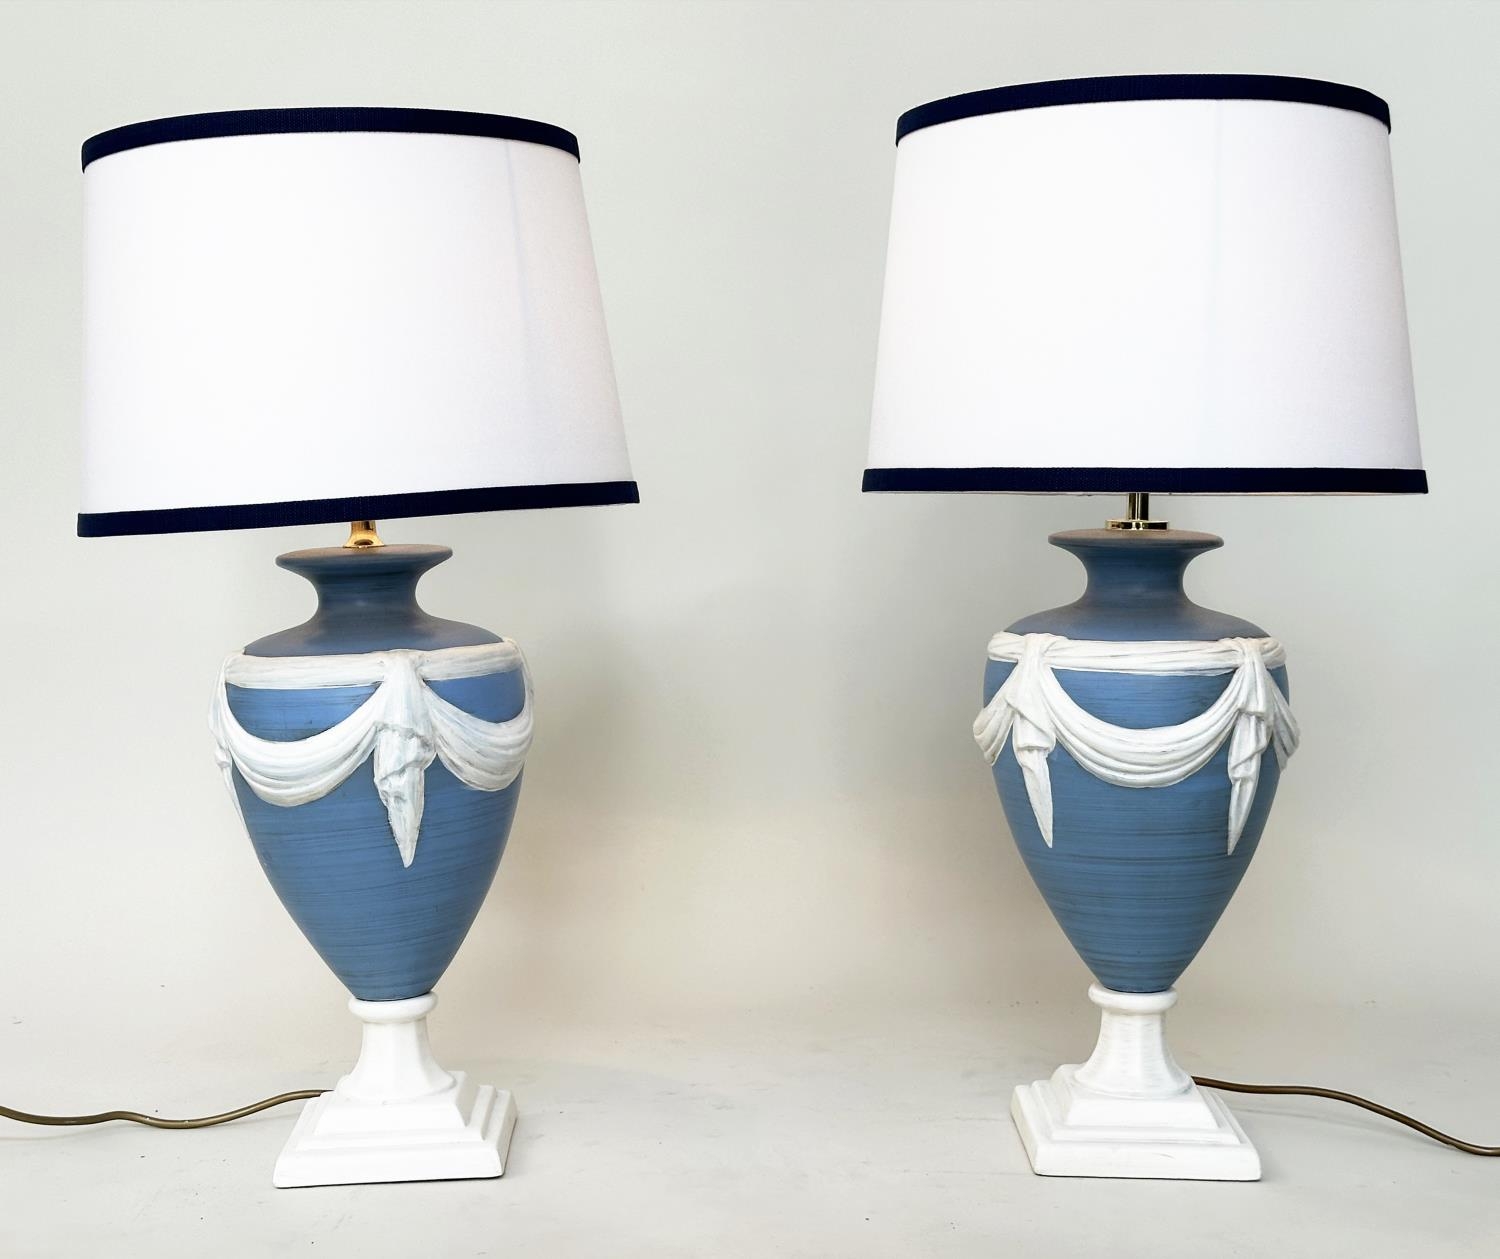 TABLE LAMPS, a pair, Wedgwood jasperware style of vase form with shades, 70cm H. - Image 7 of 12